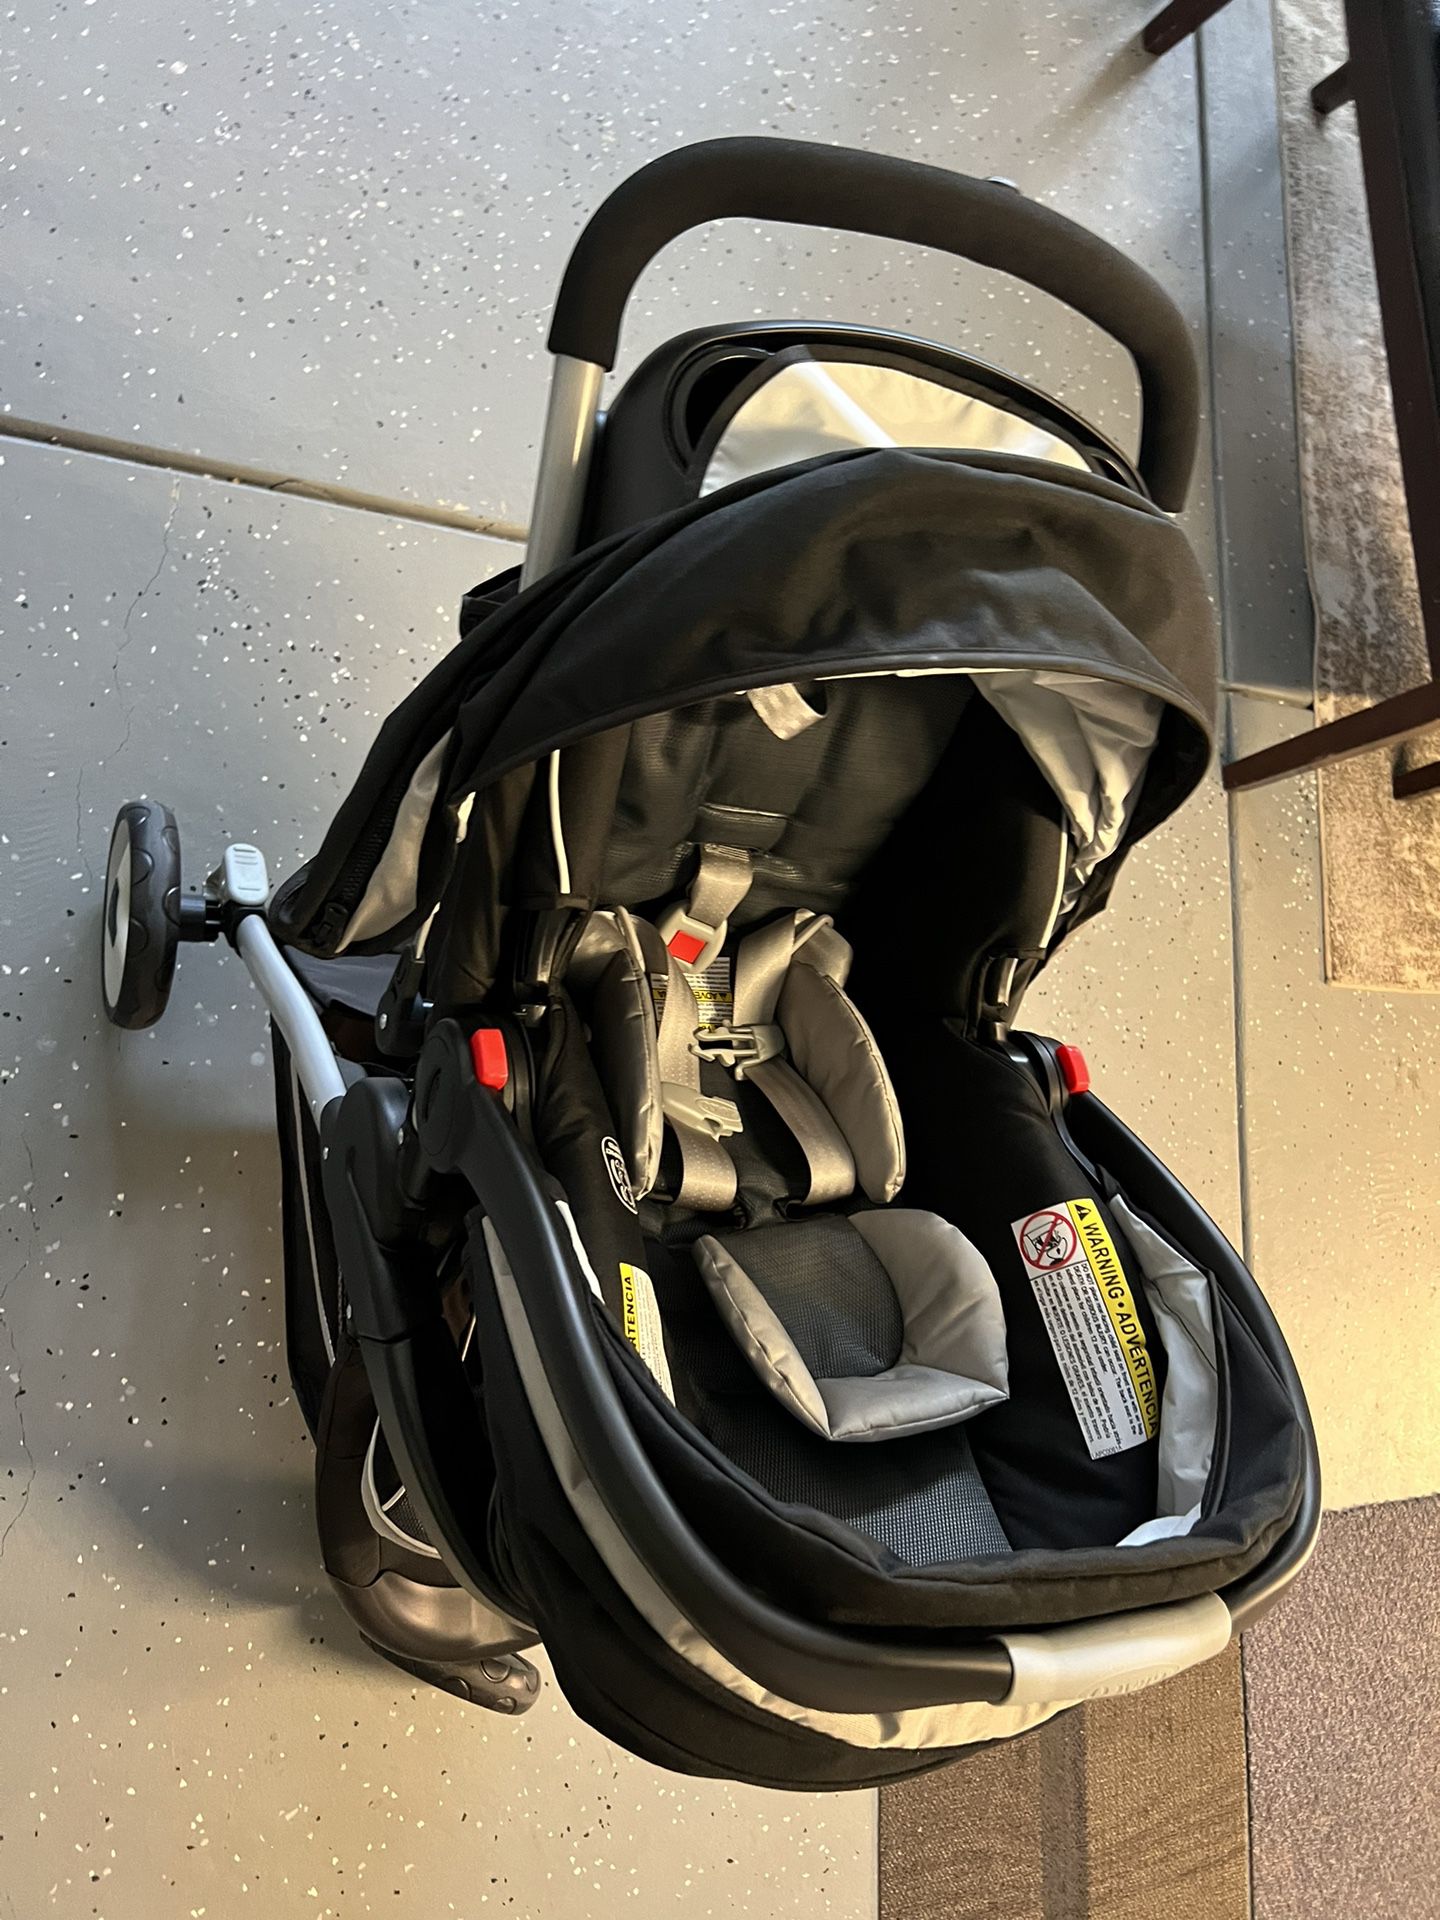 Graco Stroller And Car Seat. 